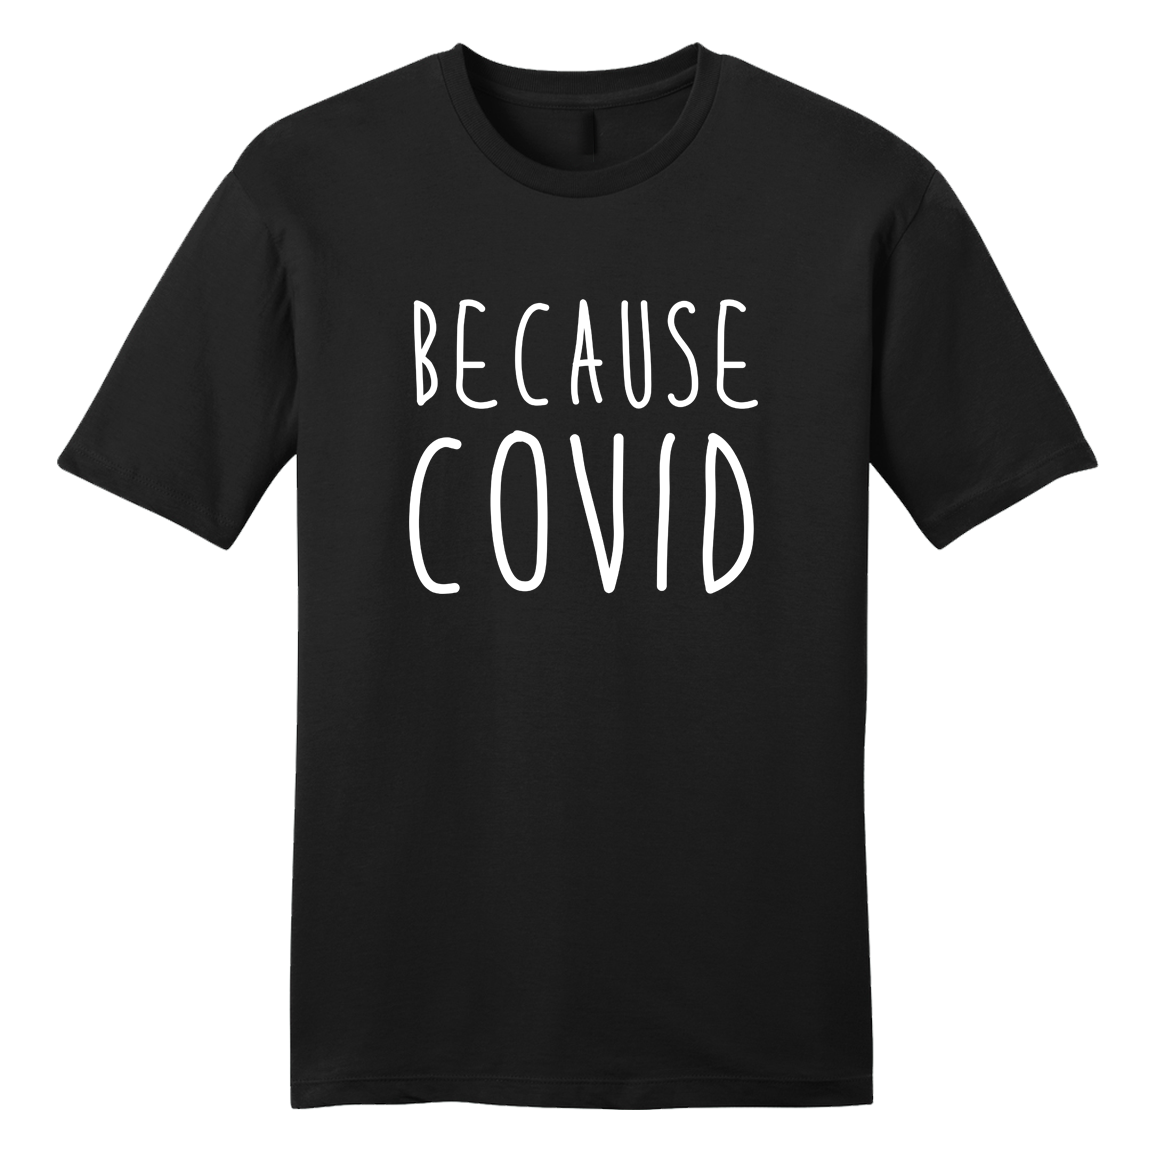 Because COVID T-shirt